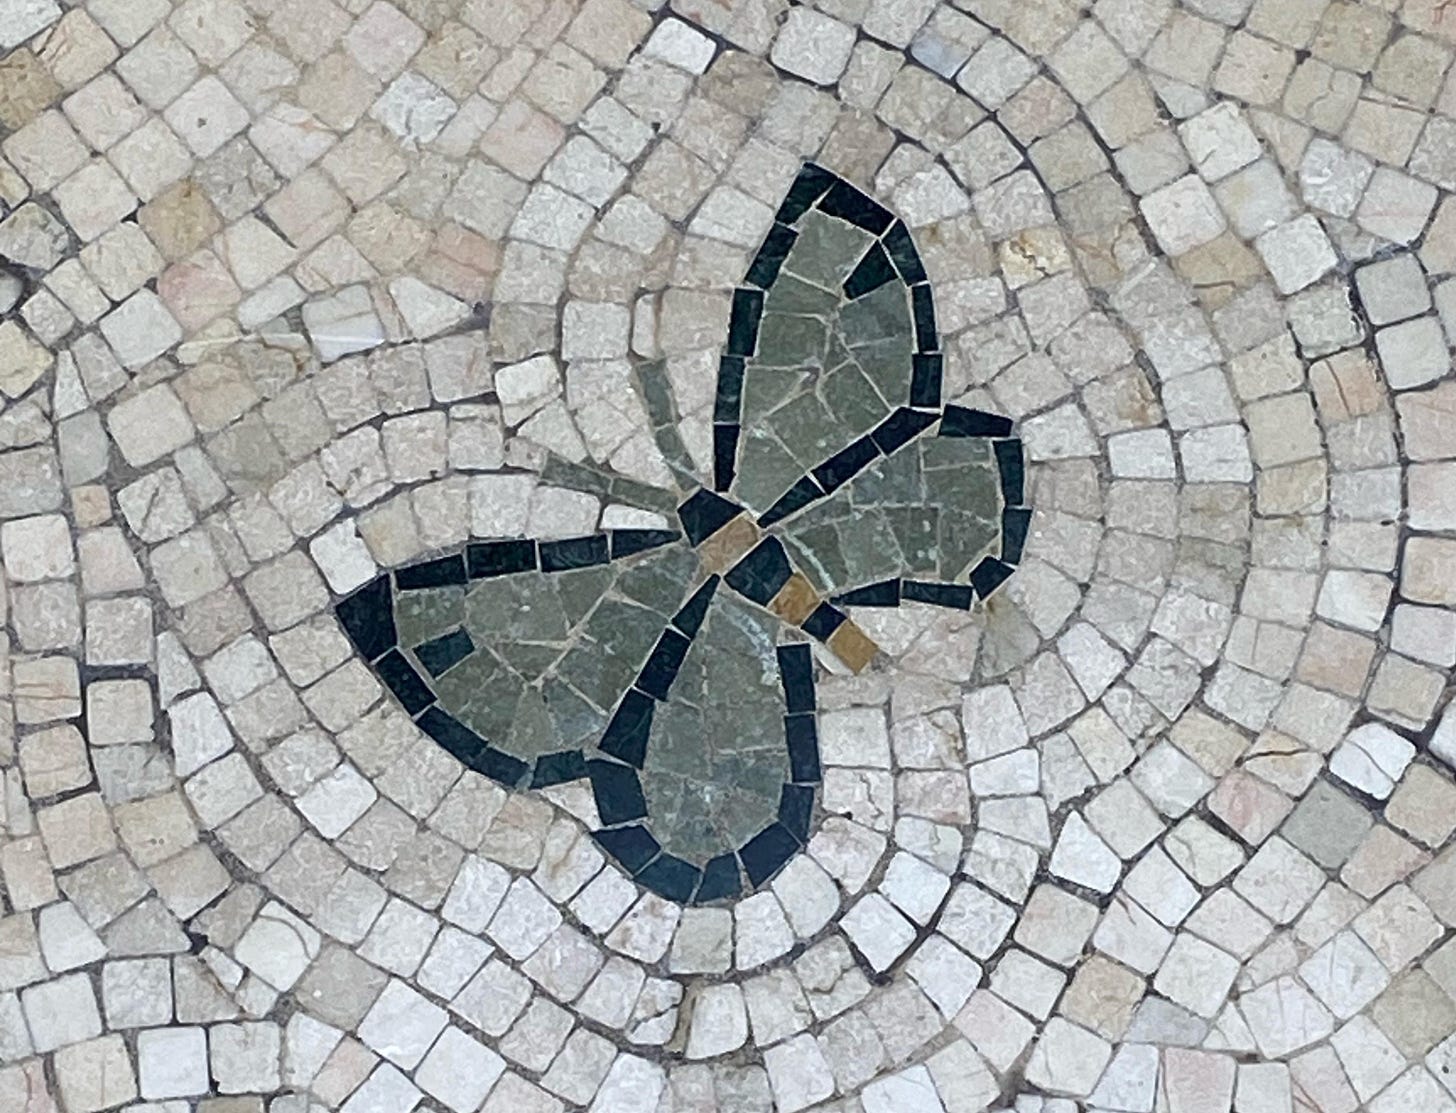 The image of a butterfly is created from small dark pieces of tile, set into a floor of light colored tile.